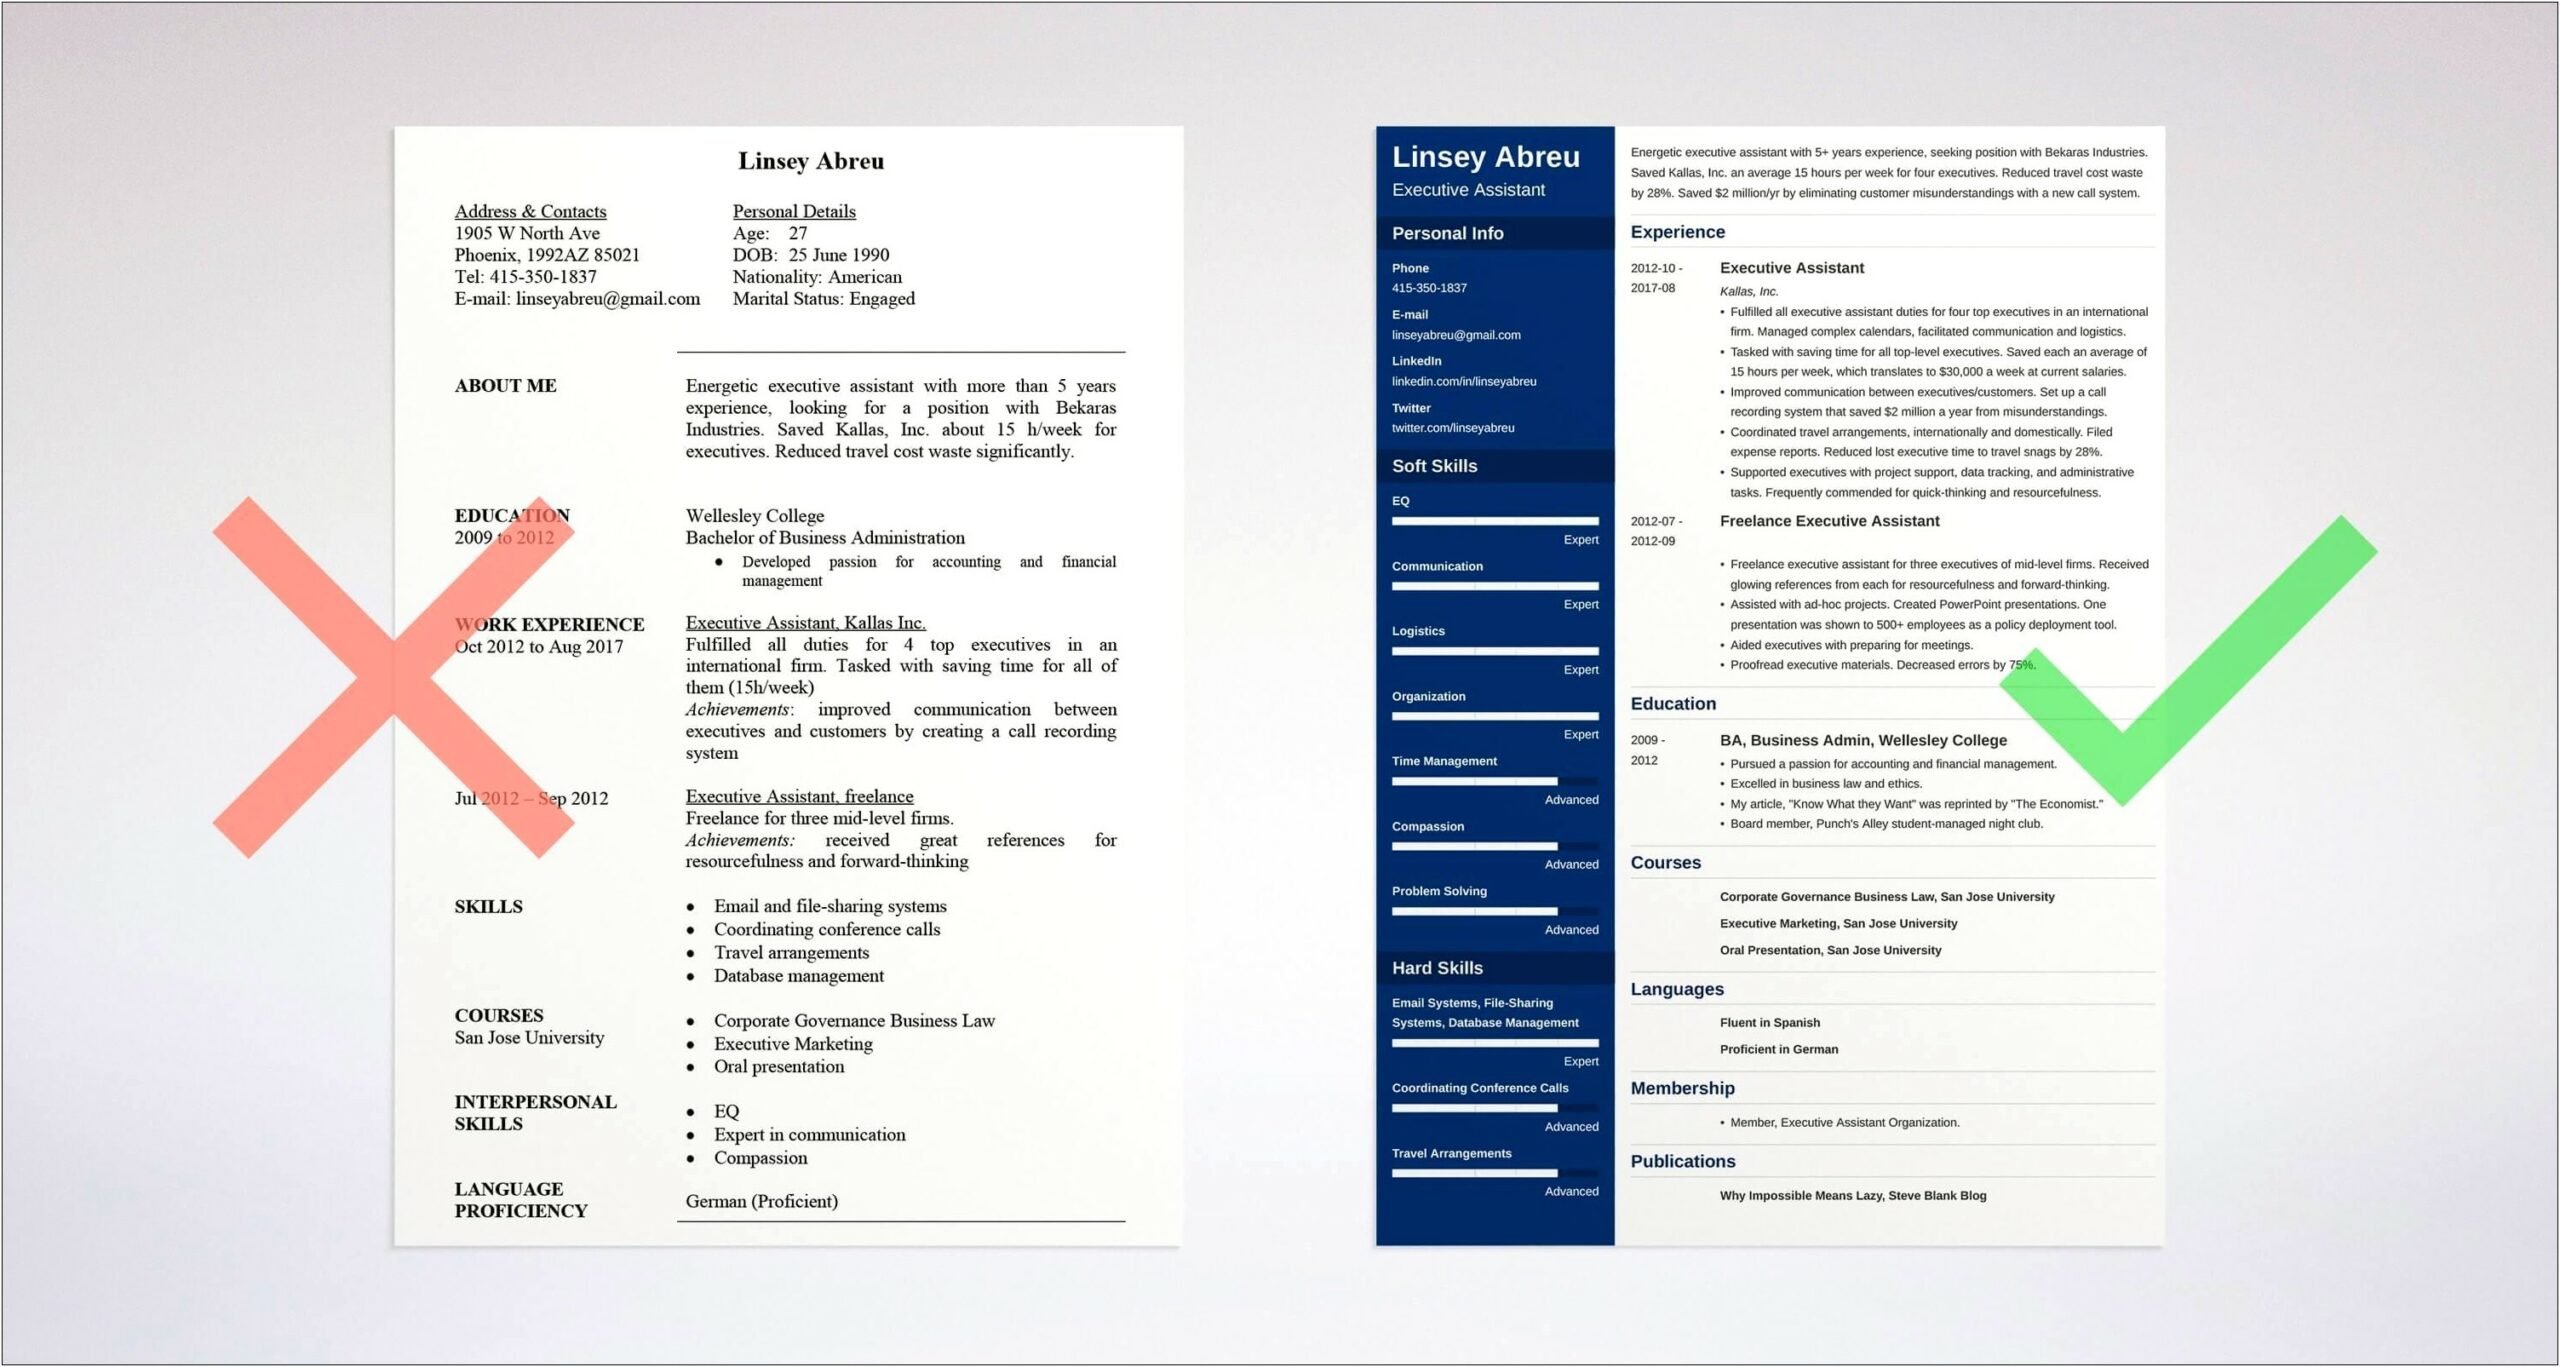 Executive Assistant Role Resume Sample